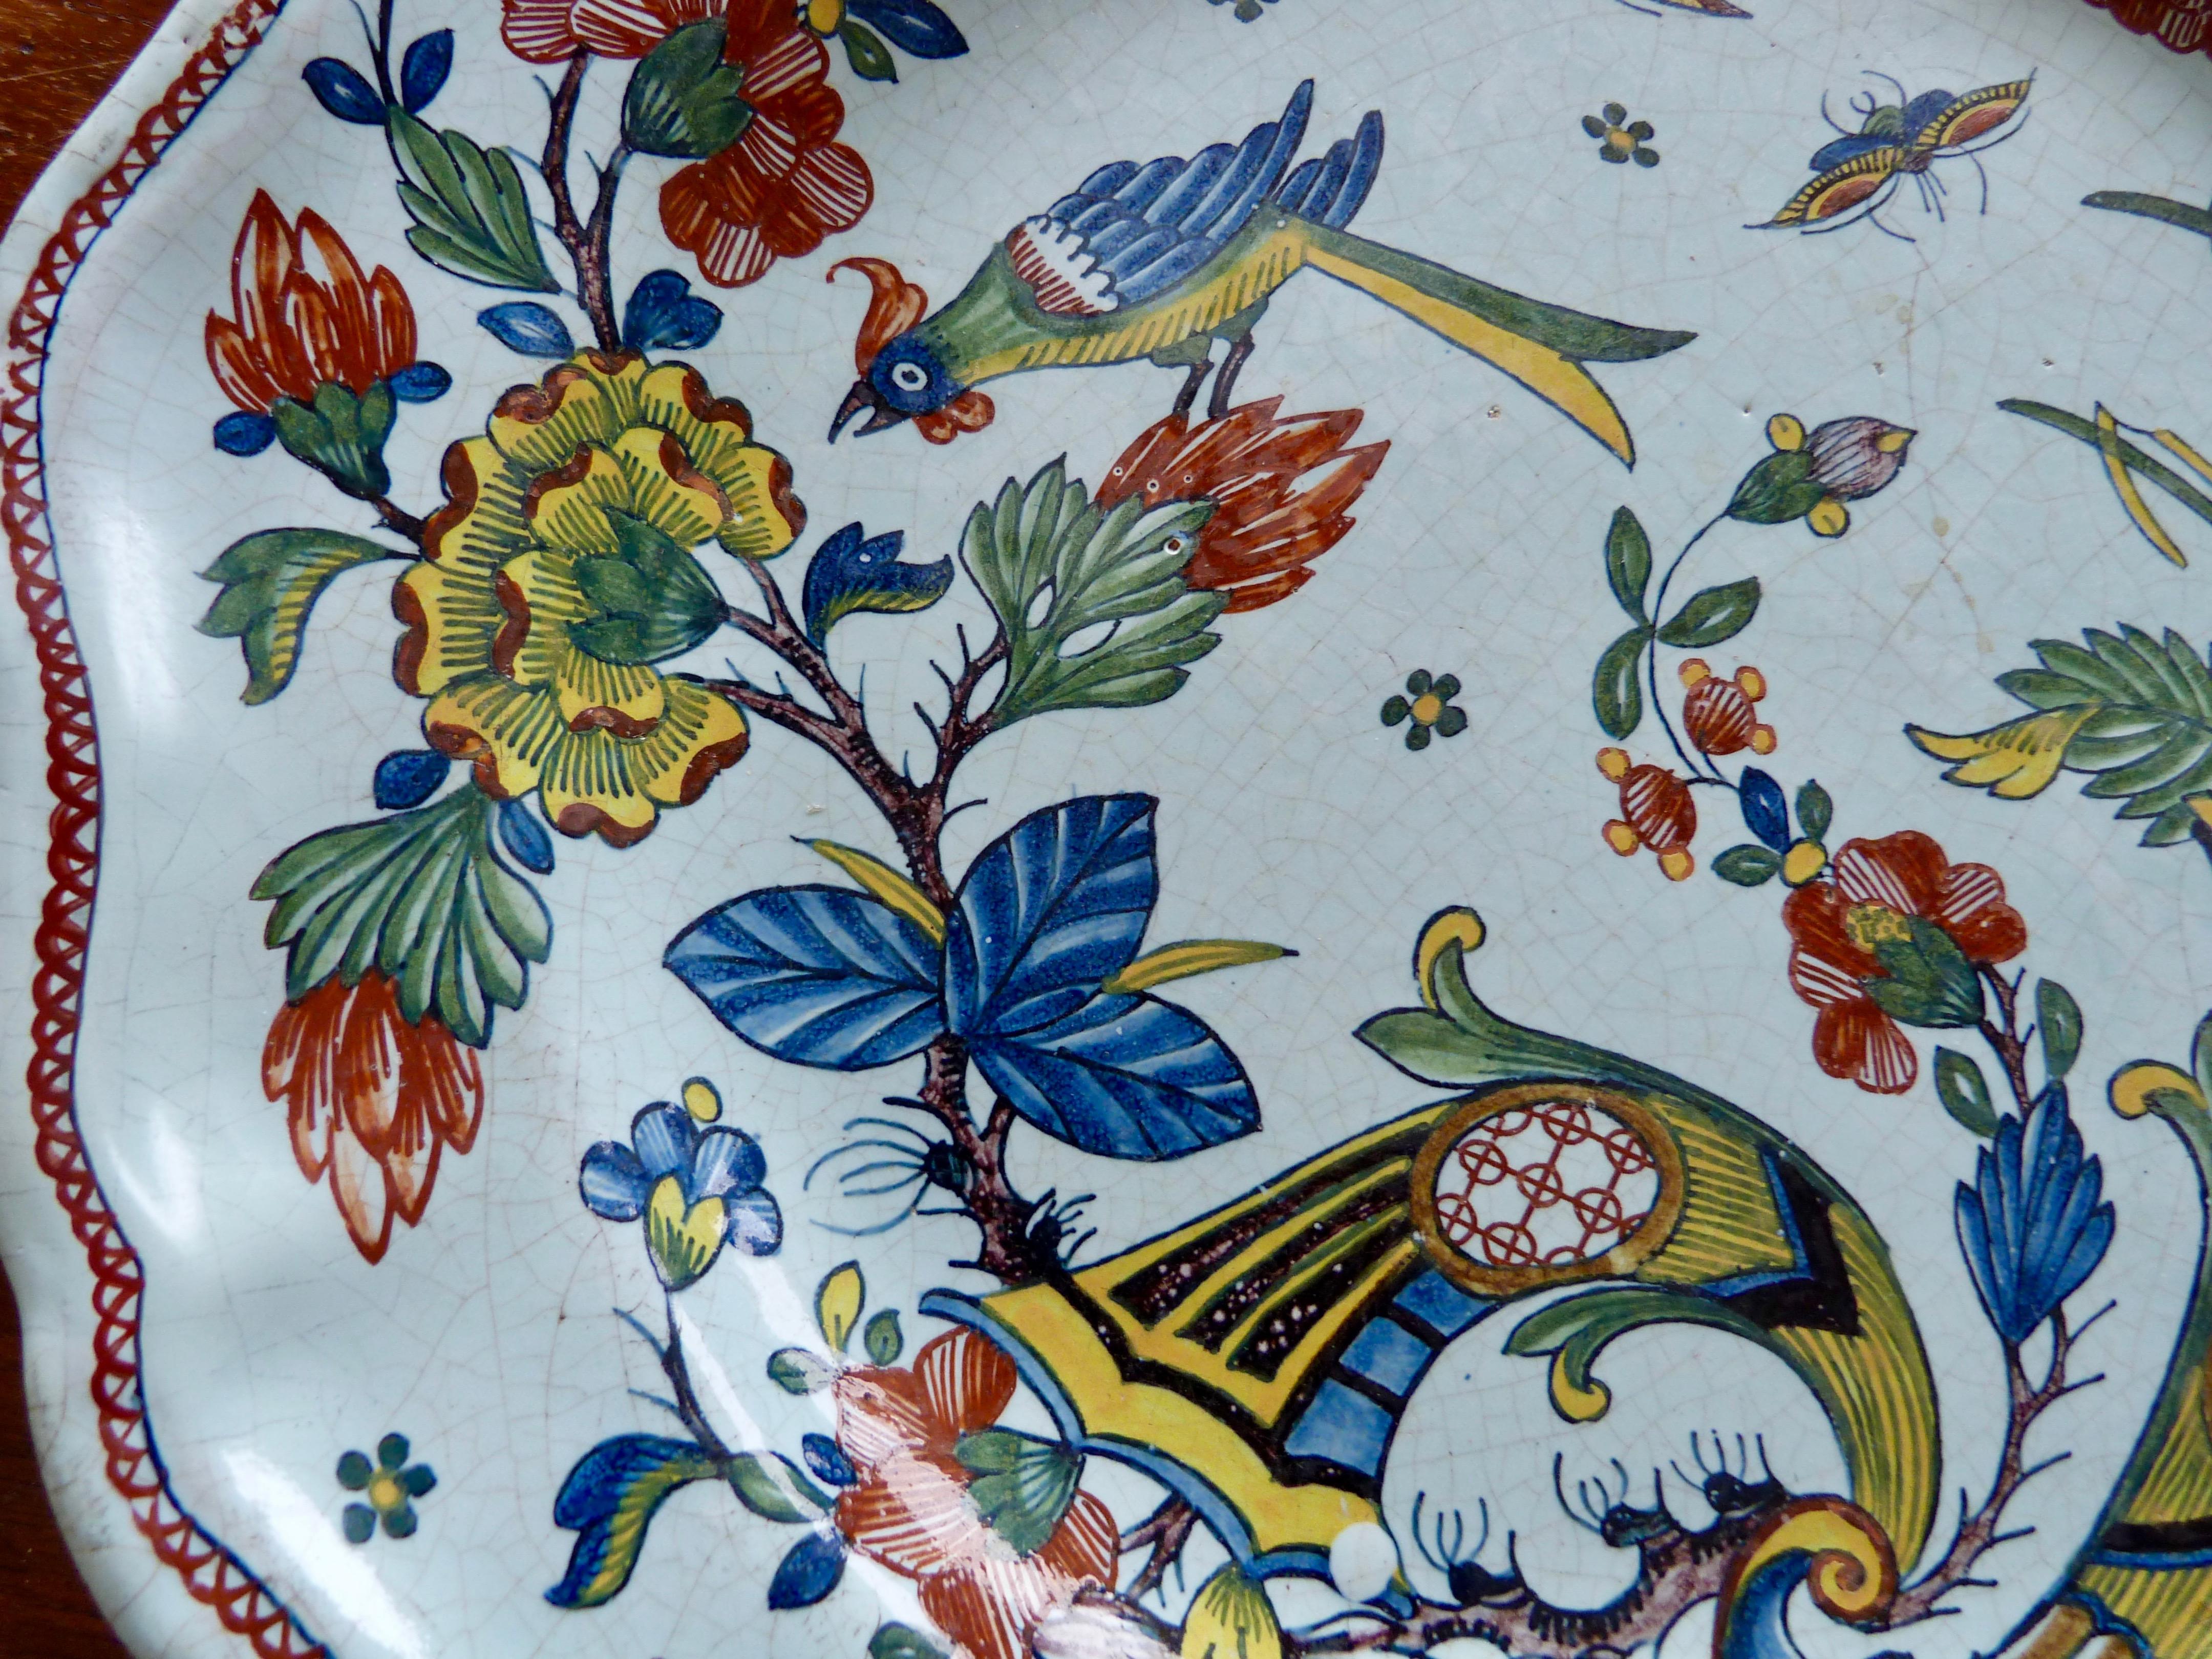 Hand-Painted French Rouen Large Faïence Charger, Mid-18th Century